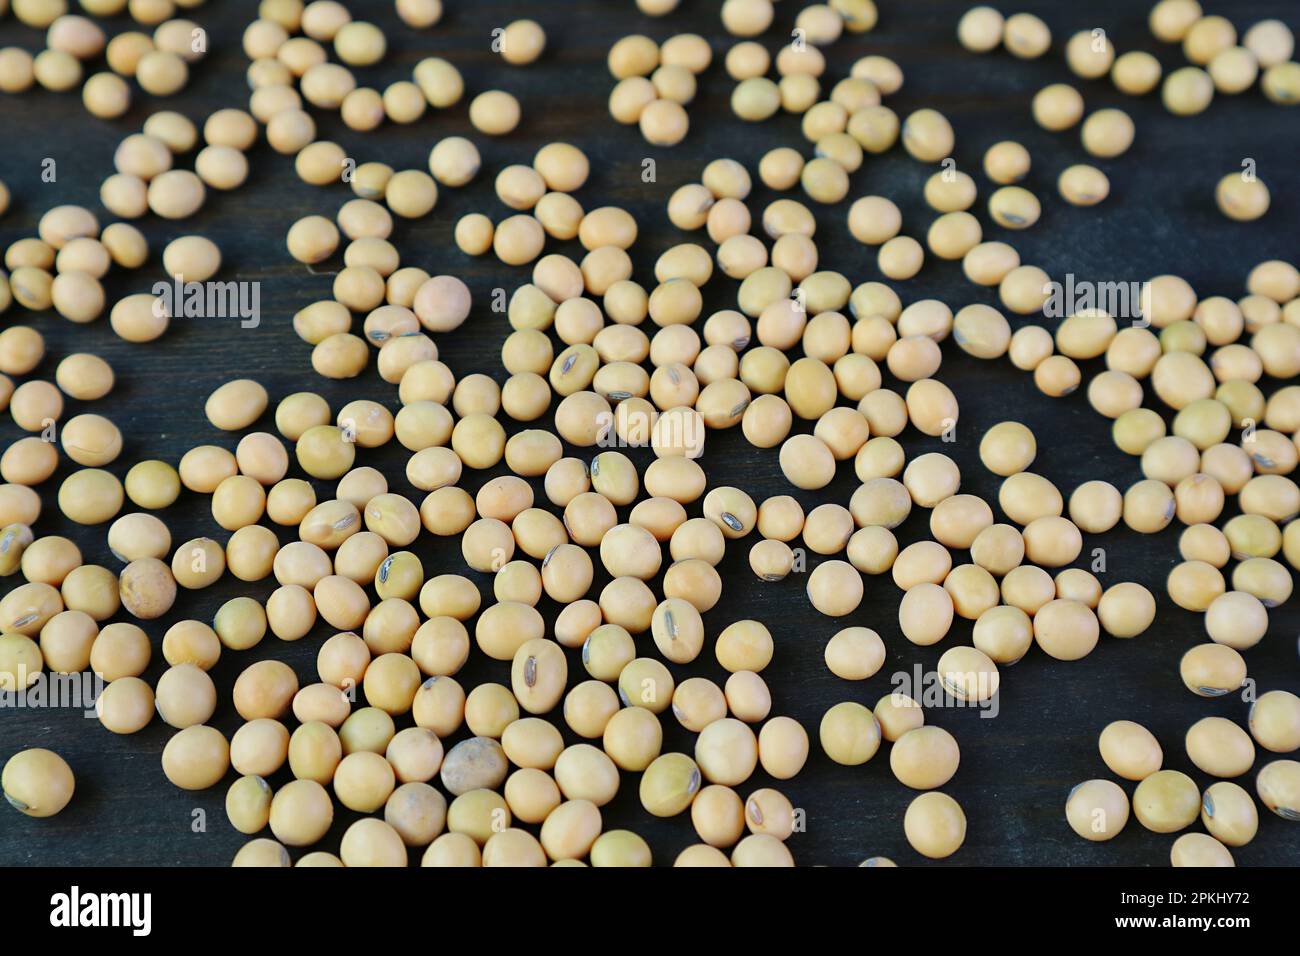 Heap of dried soybeans scattered on black wooden background Stock Photo